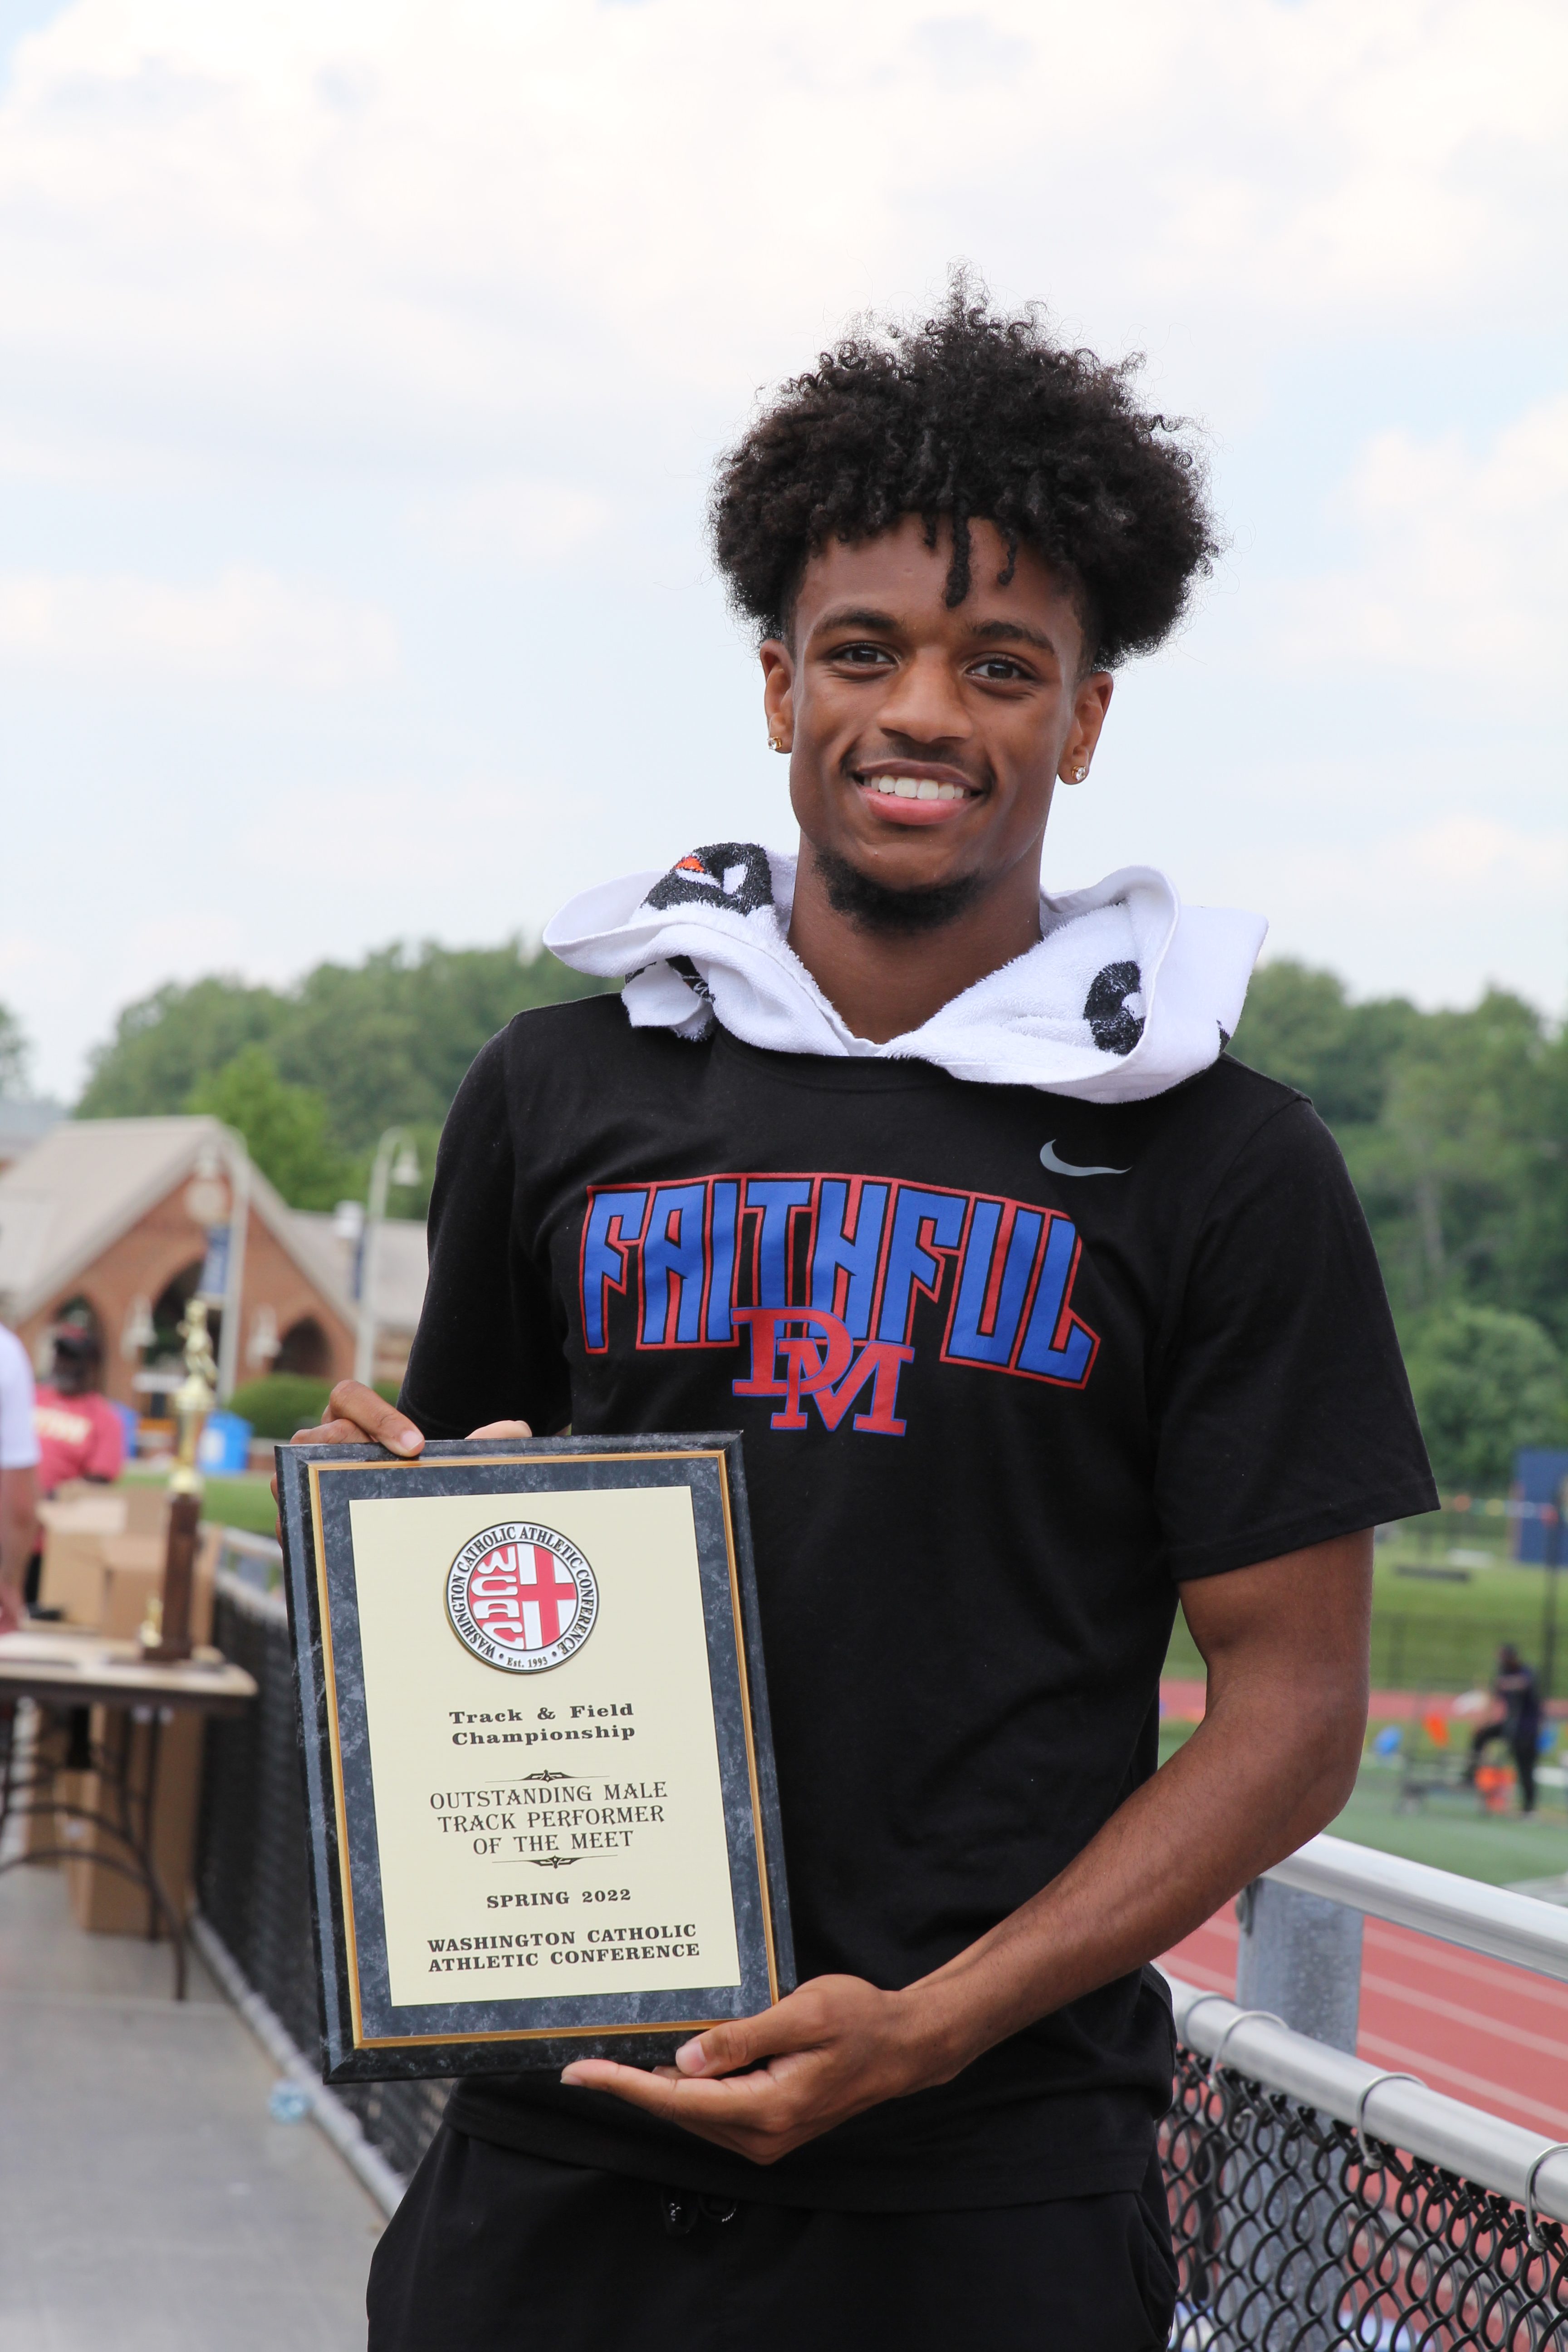  Senior Dawson Grogan helped lead DeMatha to the 2022 WCAC outdoor track championships by winning two individual events and contributing to a meet-record 4x800-meter relay team. He was named outstanding male runner and will compete next year at North Carolina A&T University in Greensboro. Courtesy of Ed King. 